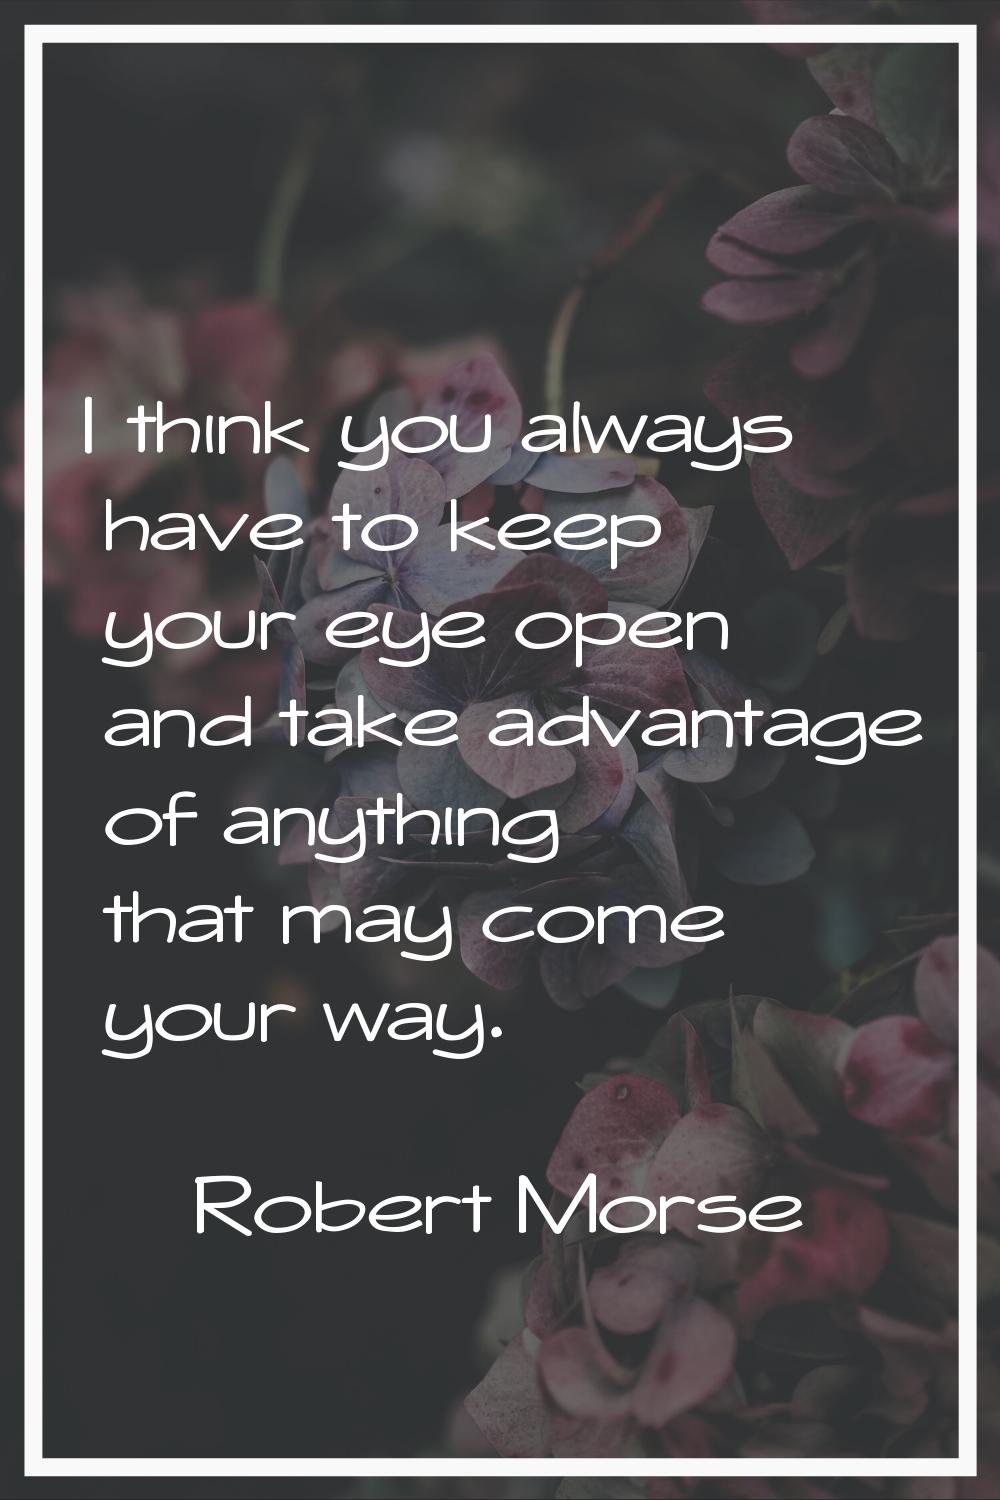 I think you always have to keep your eye open and take advantage of anything that may come your way